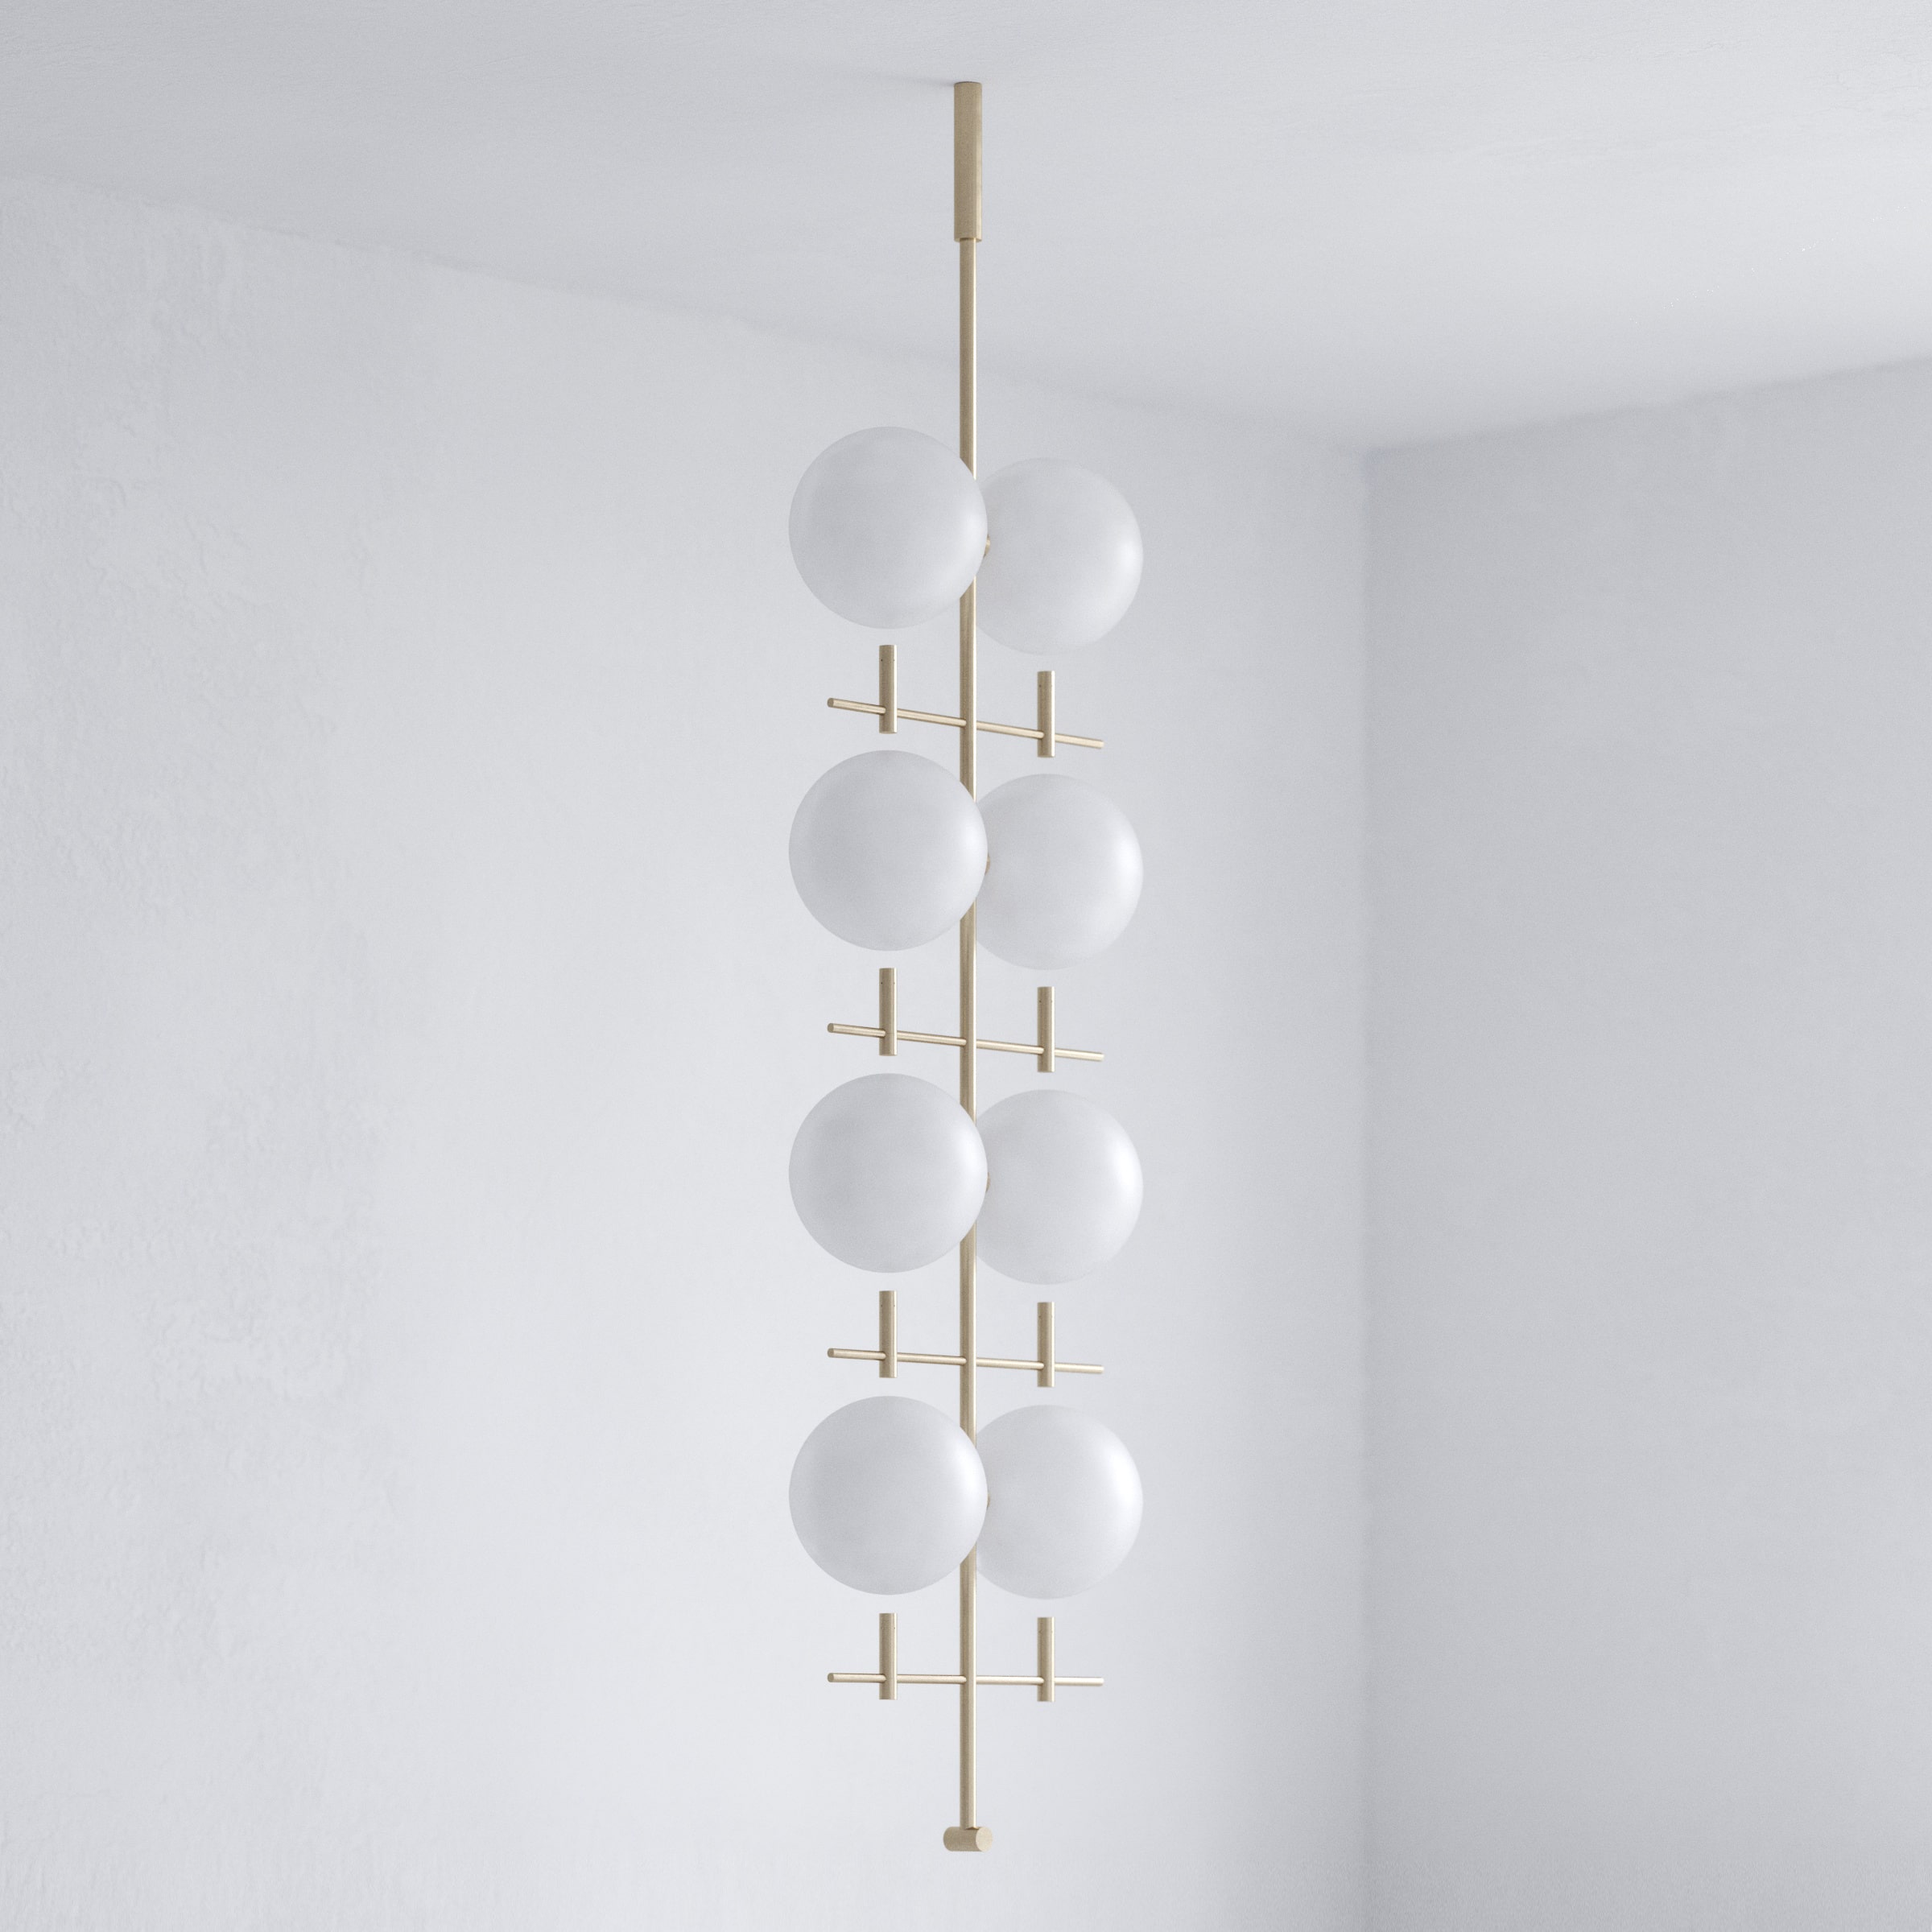 Luna-luminaries-collection-of-lighting-made-of-glass-in-combination-with-brass-hand-crafted-and-designed-locally-in-the-czech-republic-design-by-jiri-krejcirik-dimmable-led-sources-direct-and-ambient-interior-illumination-